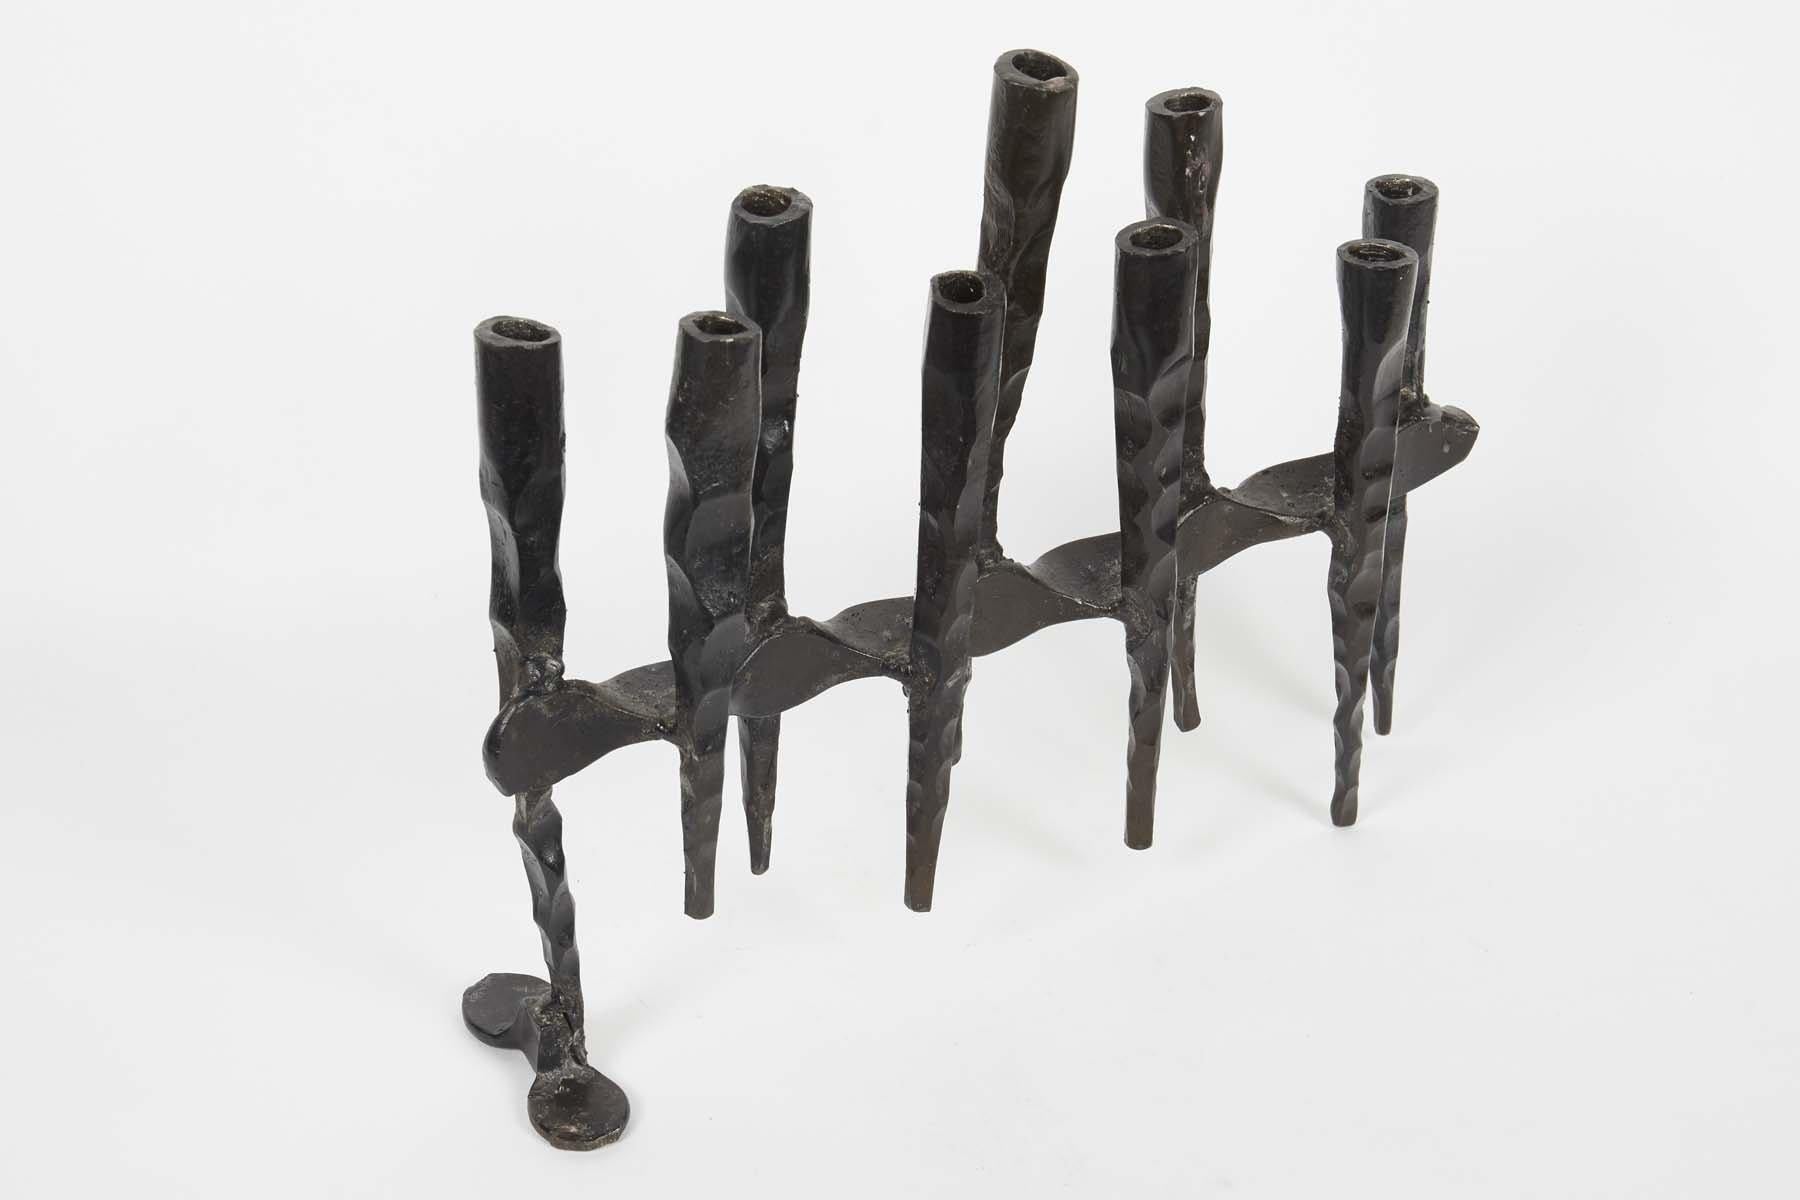 Hand forged, iron Hanukkah lamp Menorah in the style known as “Brutalism”, David Palombo, Jerusalem, Israel, circa 1950.

David Palombo (1920-1966), was a sculptor and painter. He was born in Turkey and immigrated to Israel with his parents in 1923.